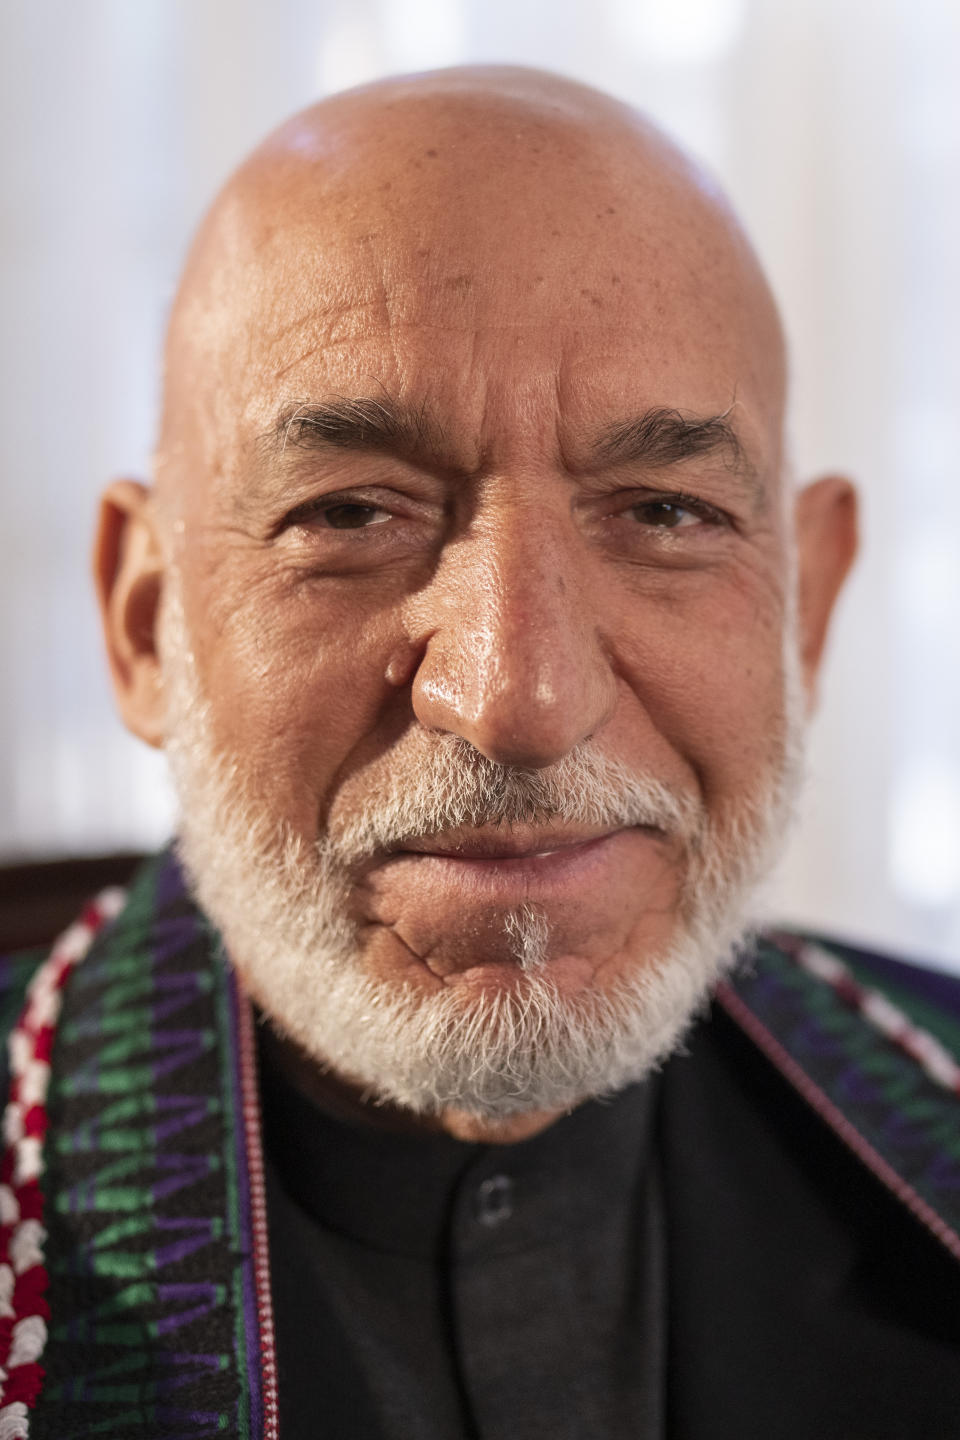 Former President of Afghanistan Hamid Karzai poses for a photo during an interview with the Associated Press in Kabul , Afghanistan, on Friday, Dec. 10, 2021. (AP Photo/Petros Giannakouris)